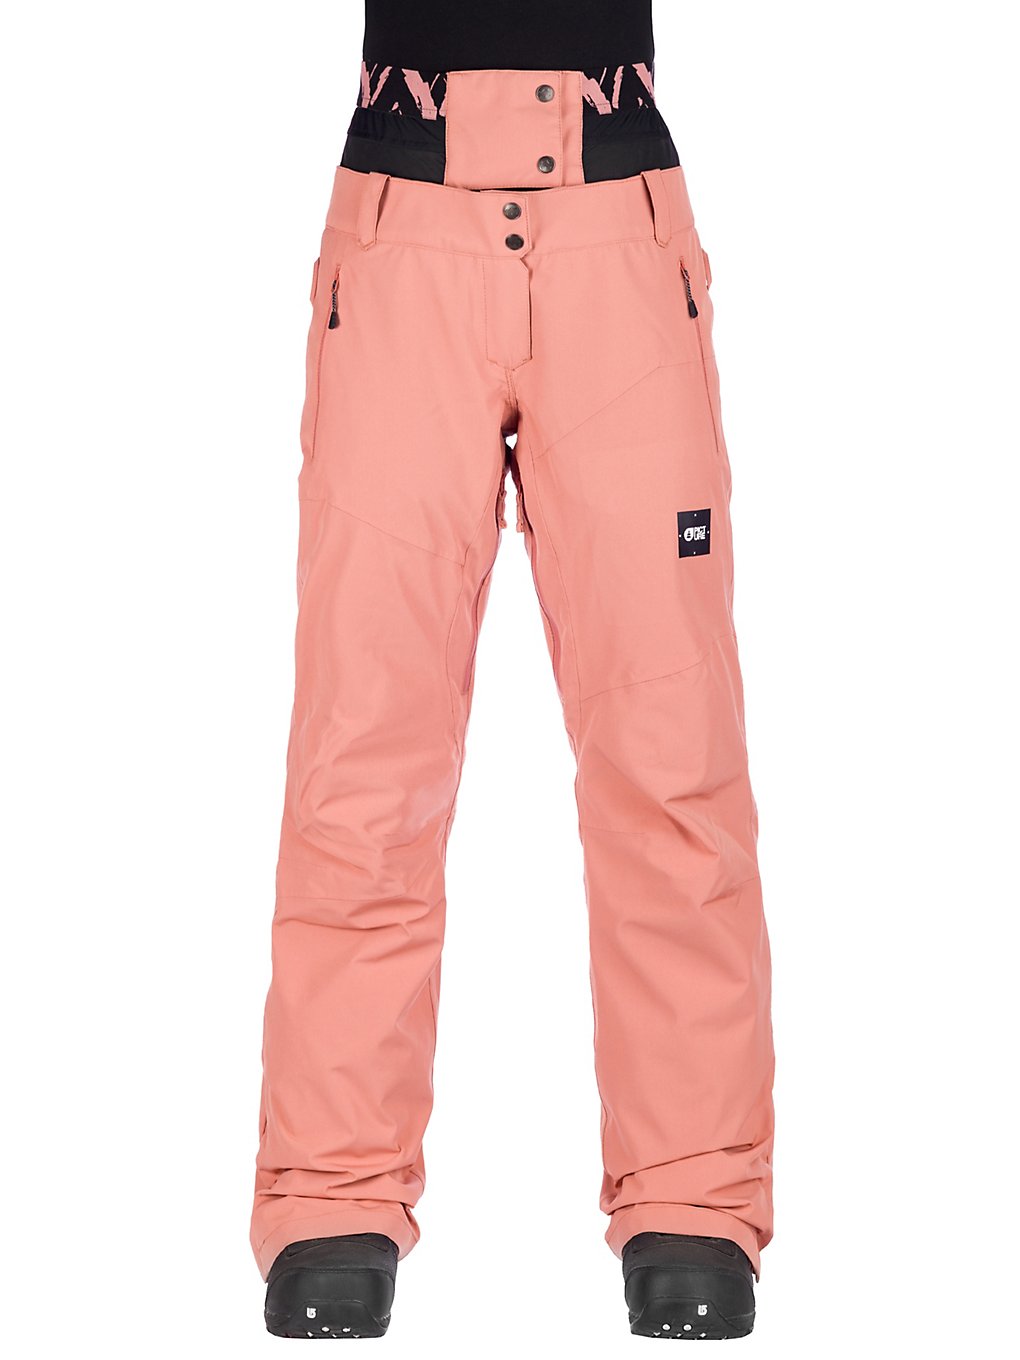 Picture Exa Pants misty pink